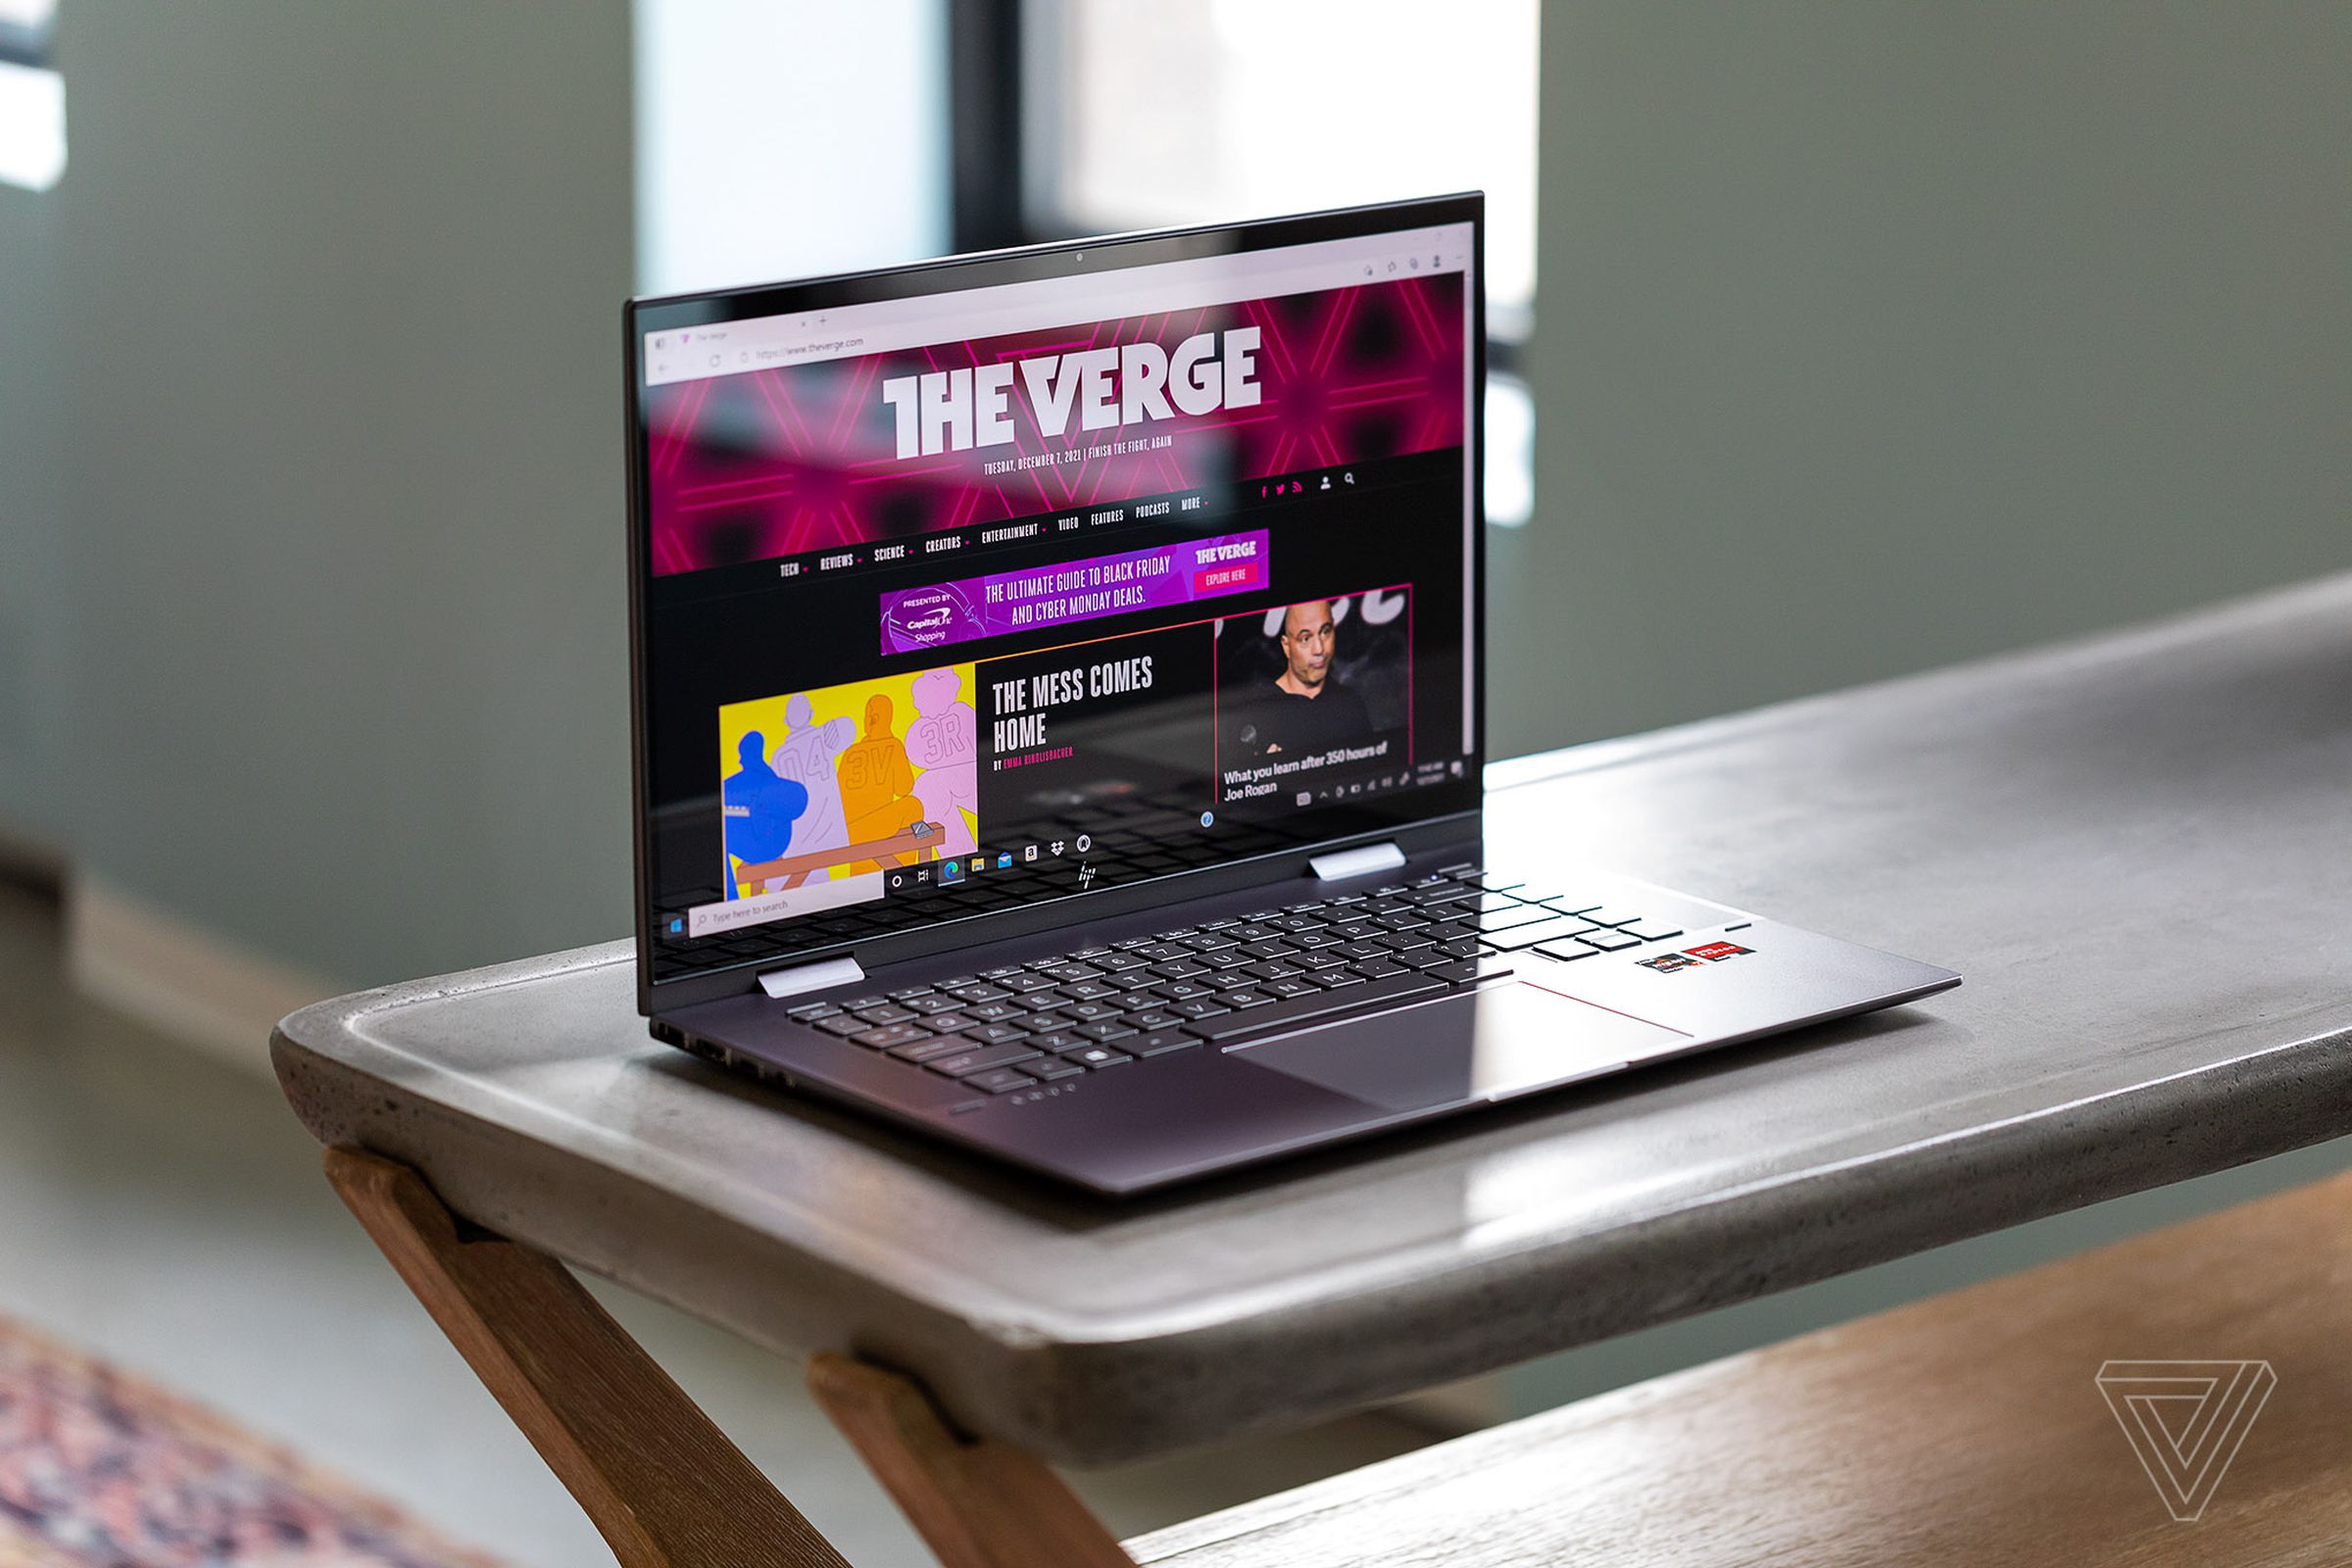 The HP Envy x360 15 on a table seen from above and to the left. The screen displays The Verge homepage.